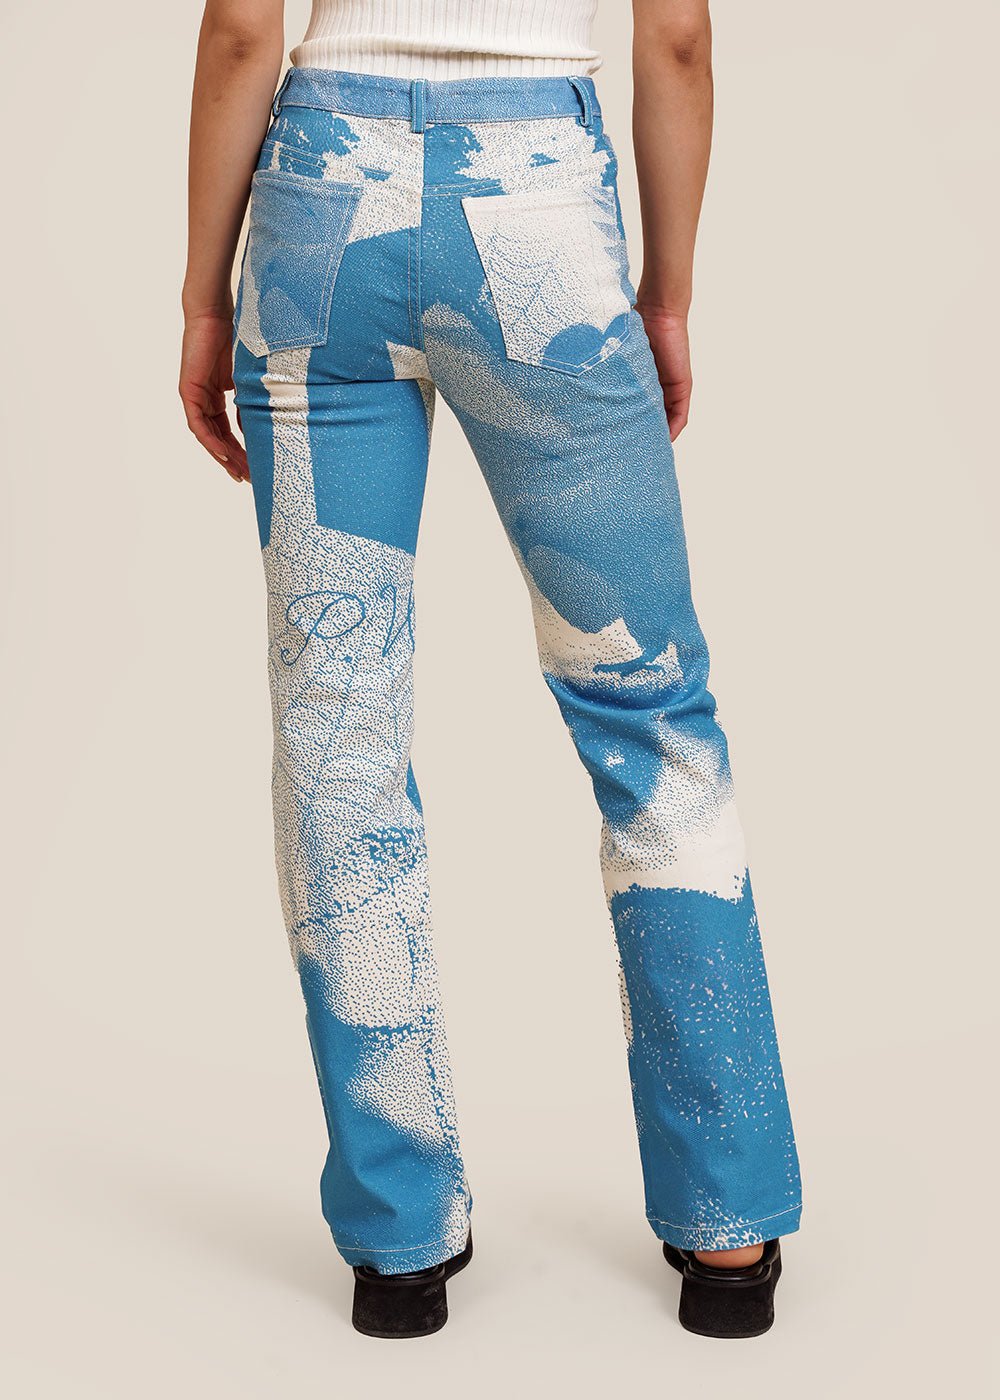 Visionaire Pants in Medium Blue by Paloma Wool – New Classics Studios